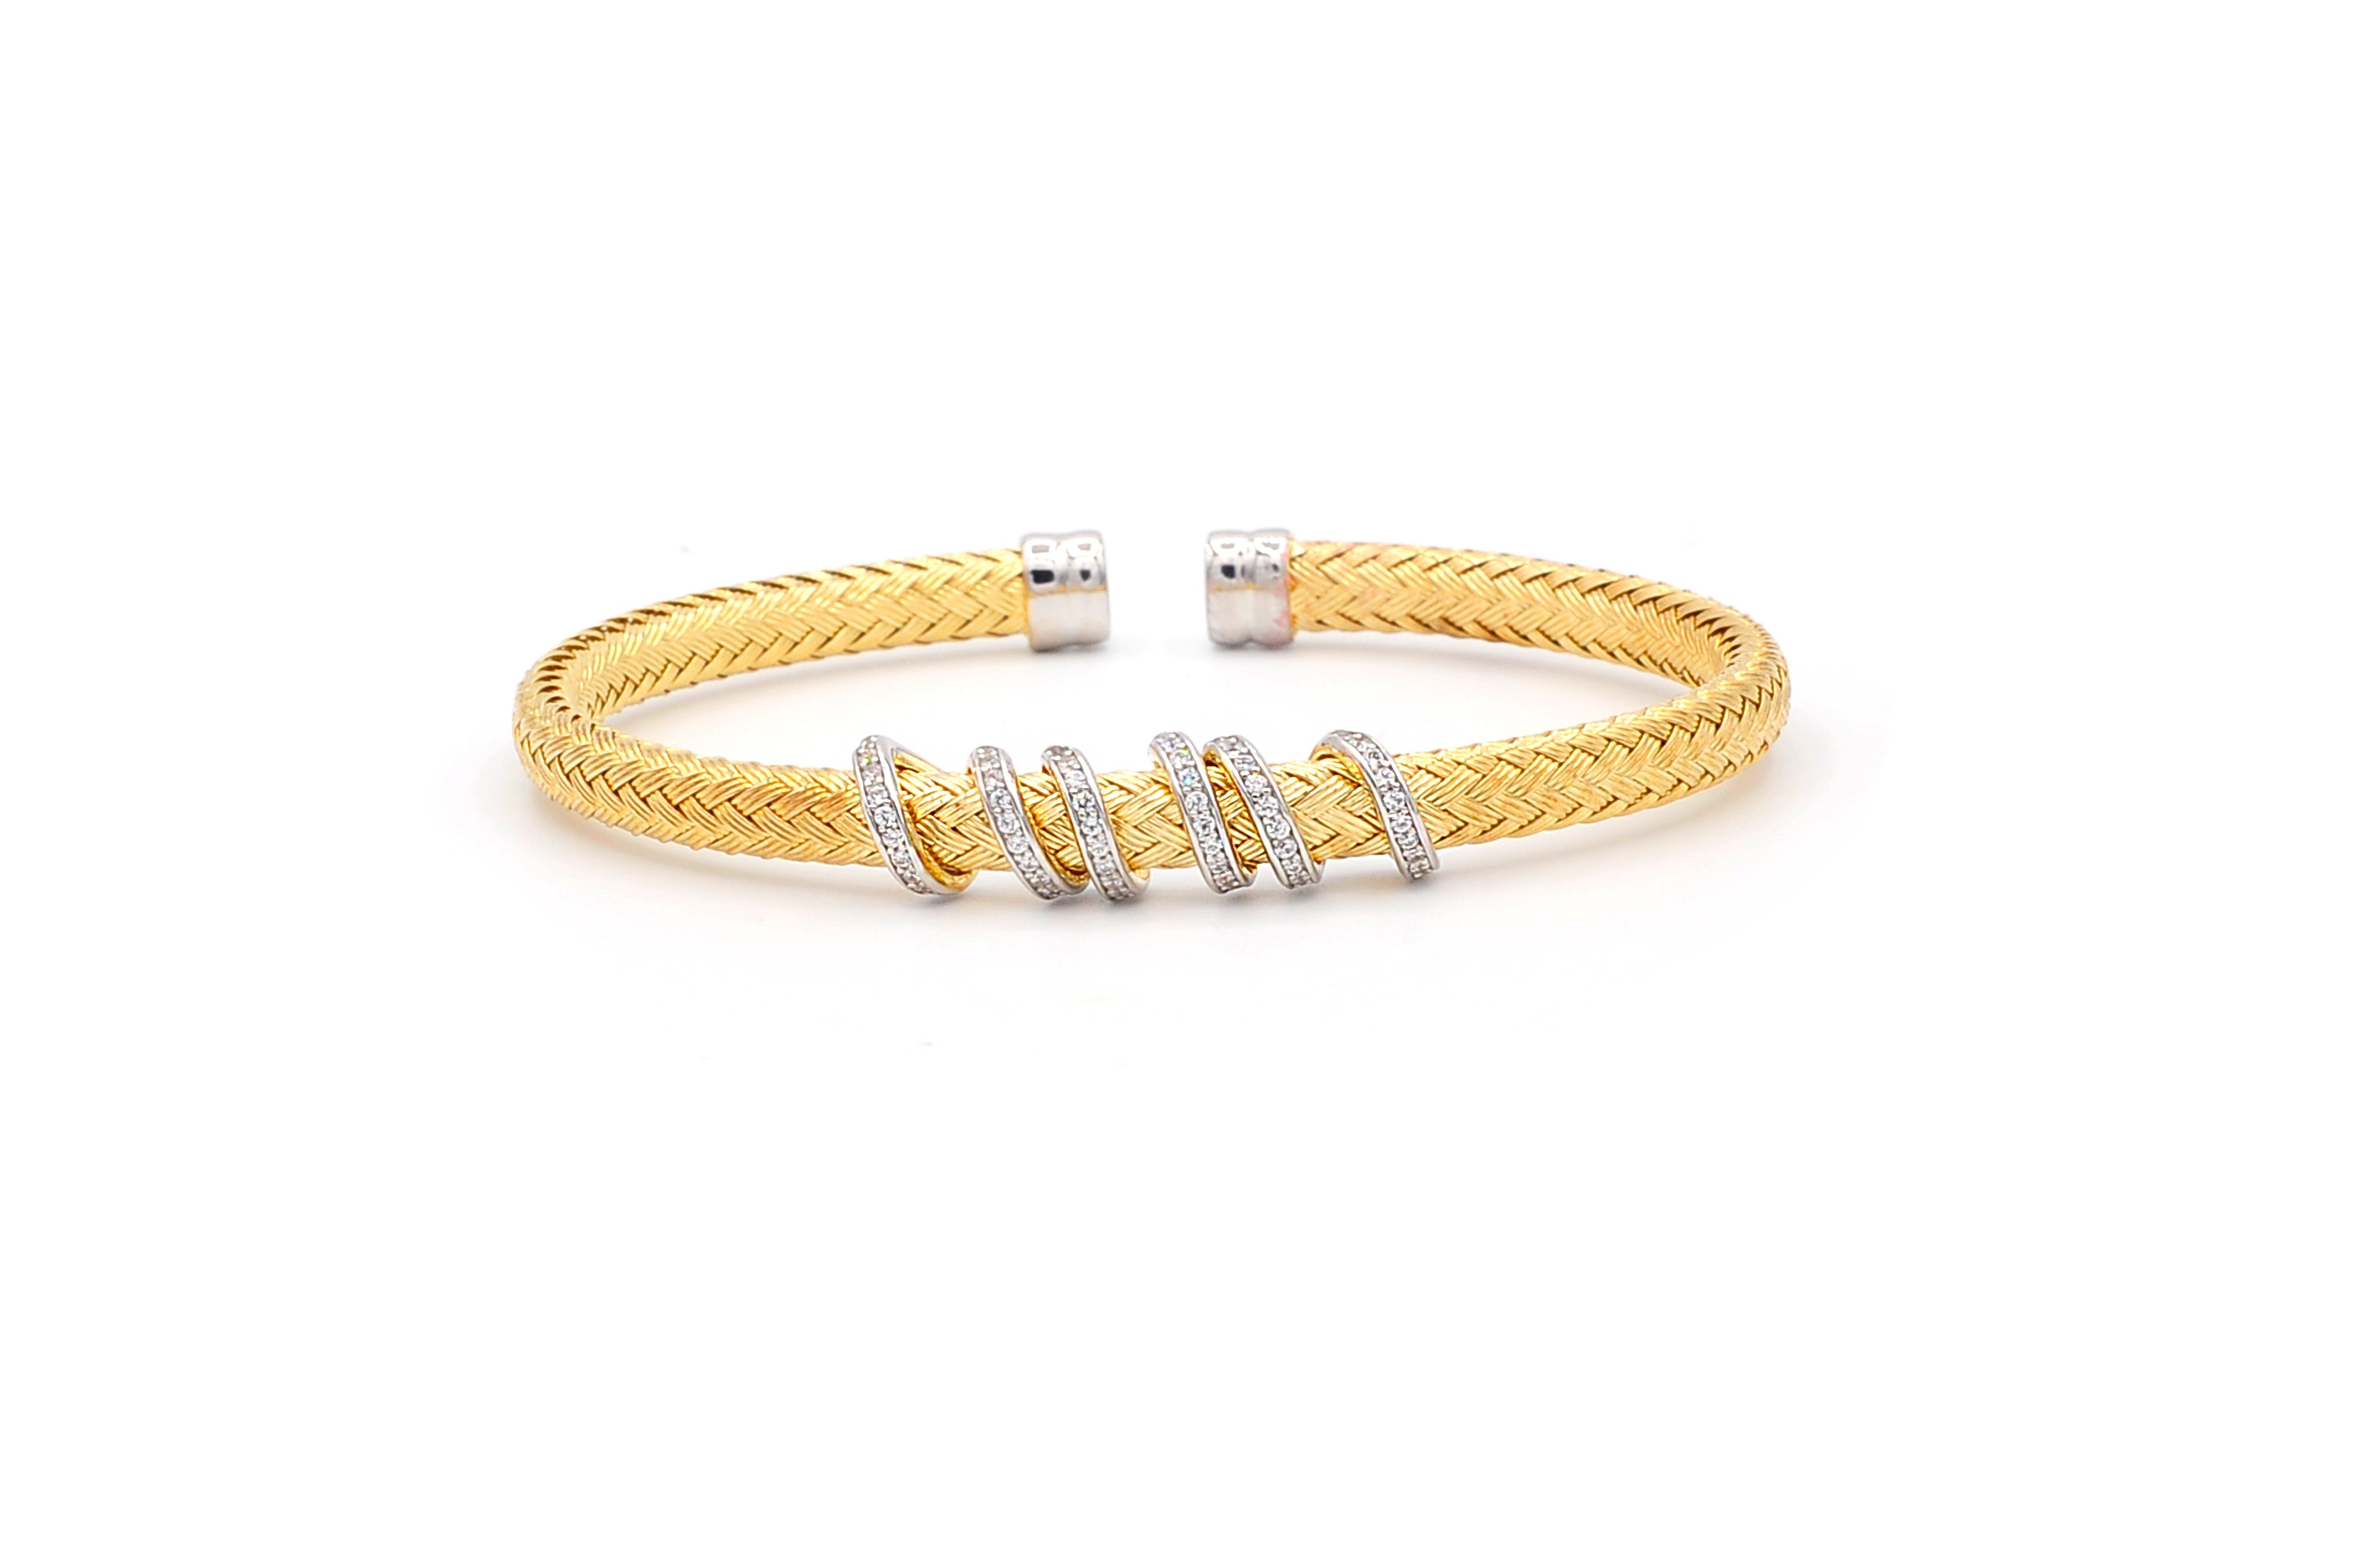 Wrapped in Mesh Gold Plated Bangle--50% OFF